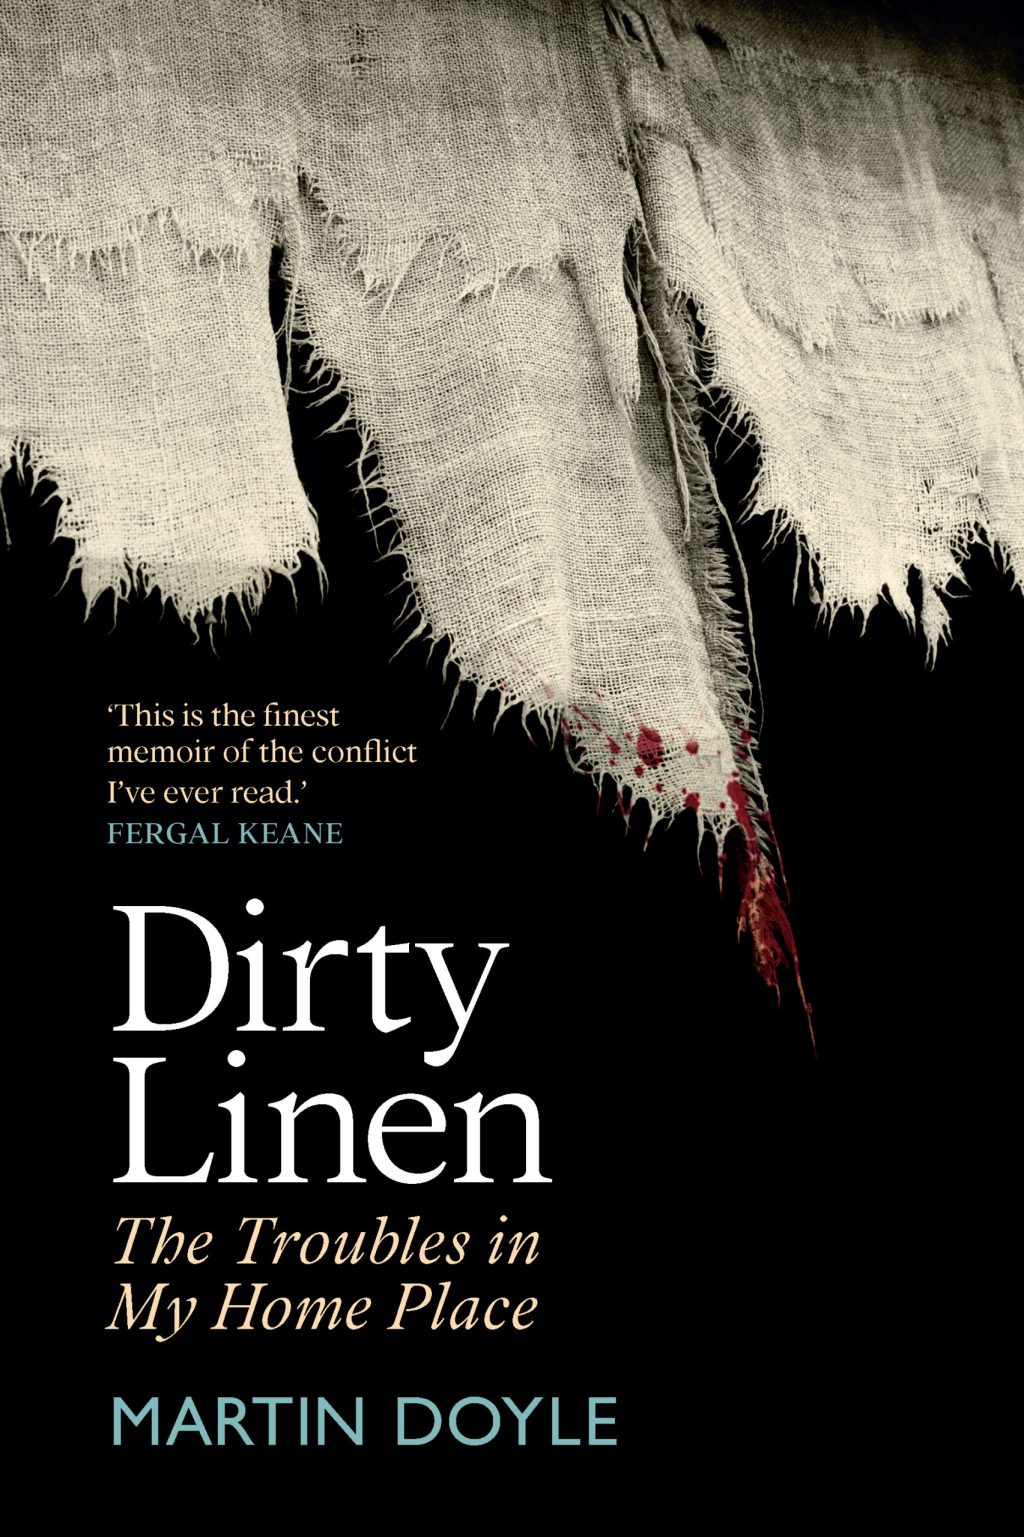 “I run out into the hall and … it was just carnage”   EA/2023/0267A. Review Essay by Christopher Stanley of “Dirty Linen: The Troubles in My Home Place” by Martin Doyle.